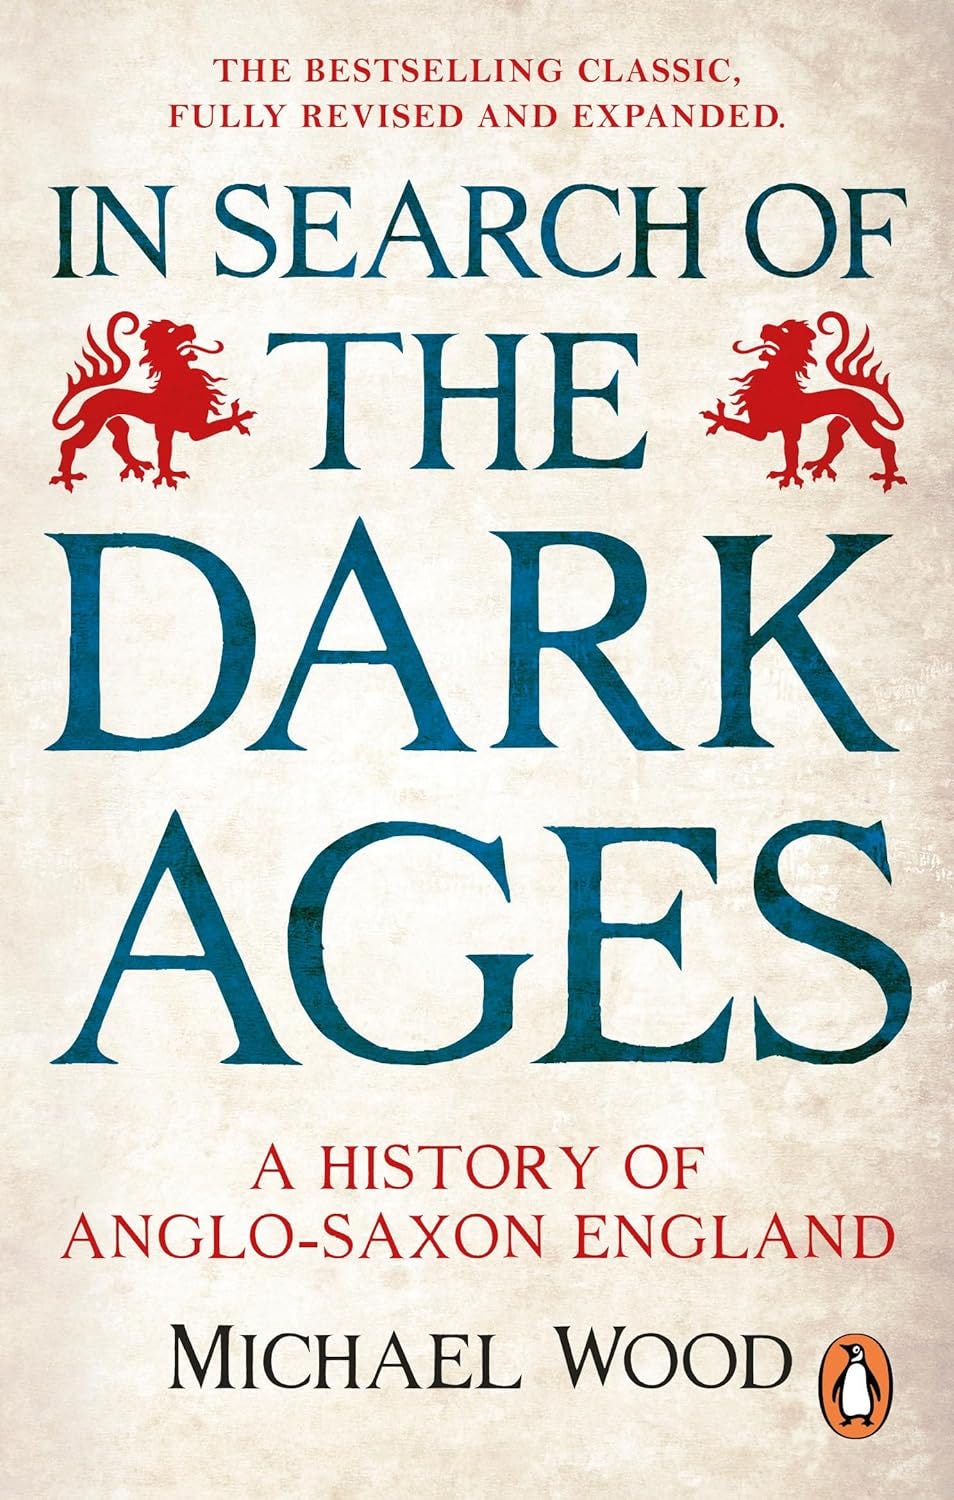 The book cover of In Search of the Dark Ages by Michael Wood